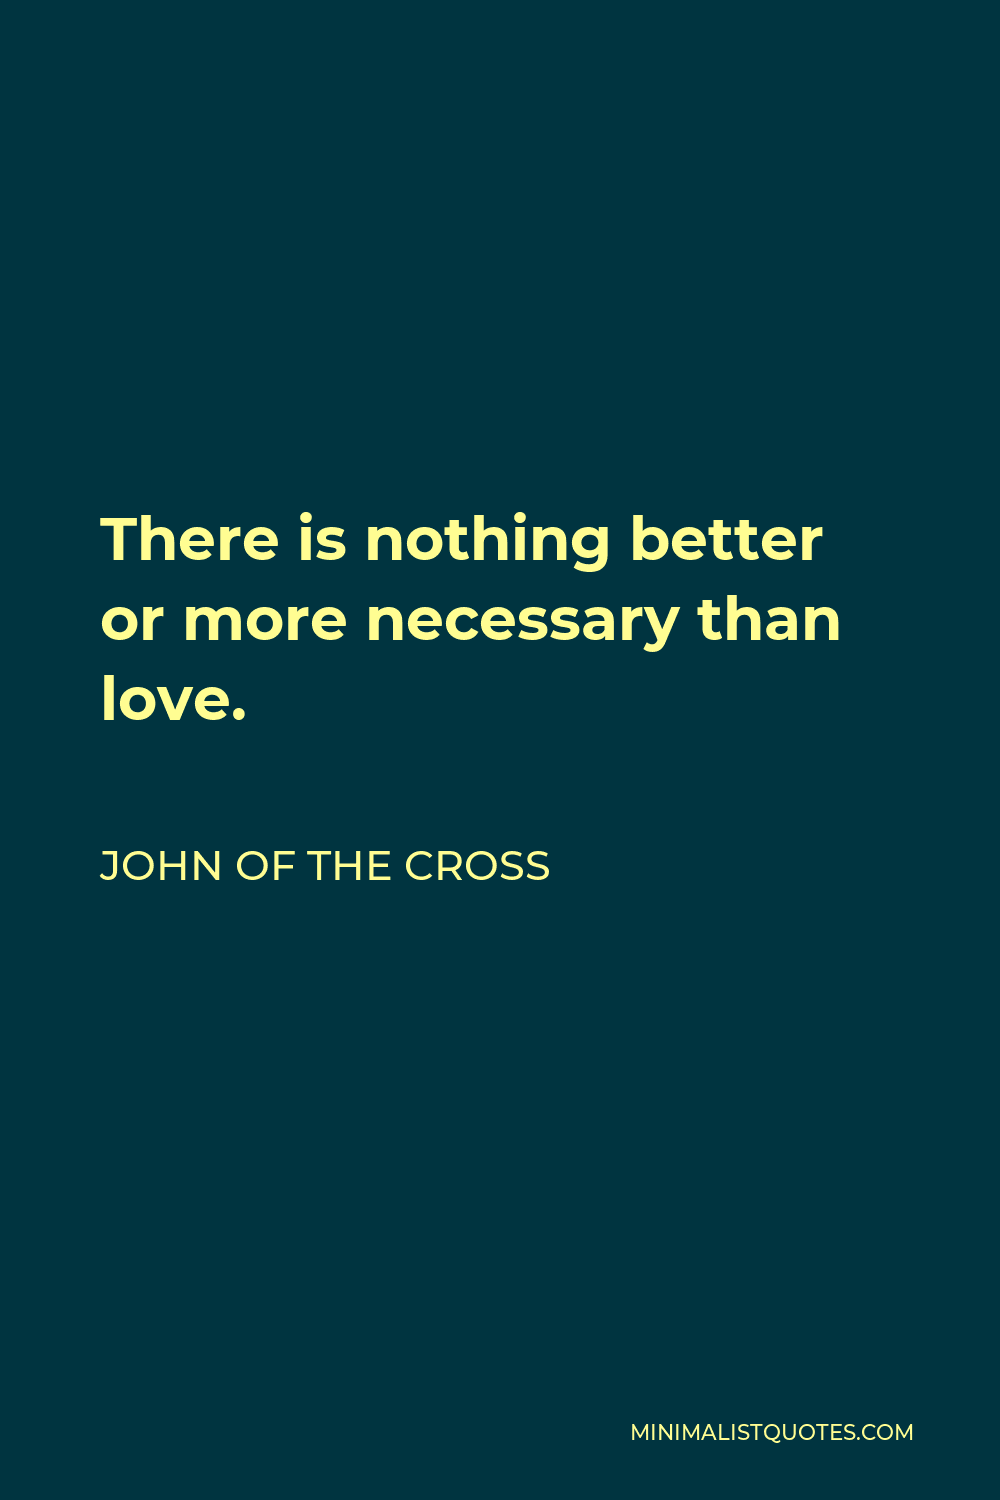 John of the Cross Quote - There is nothing better or more necessary than love.